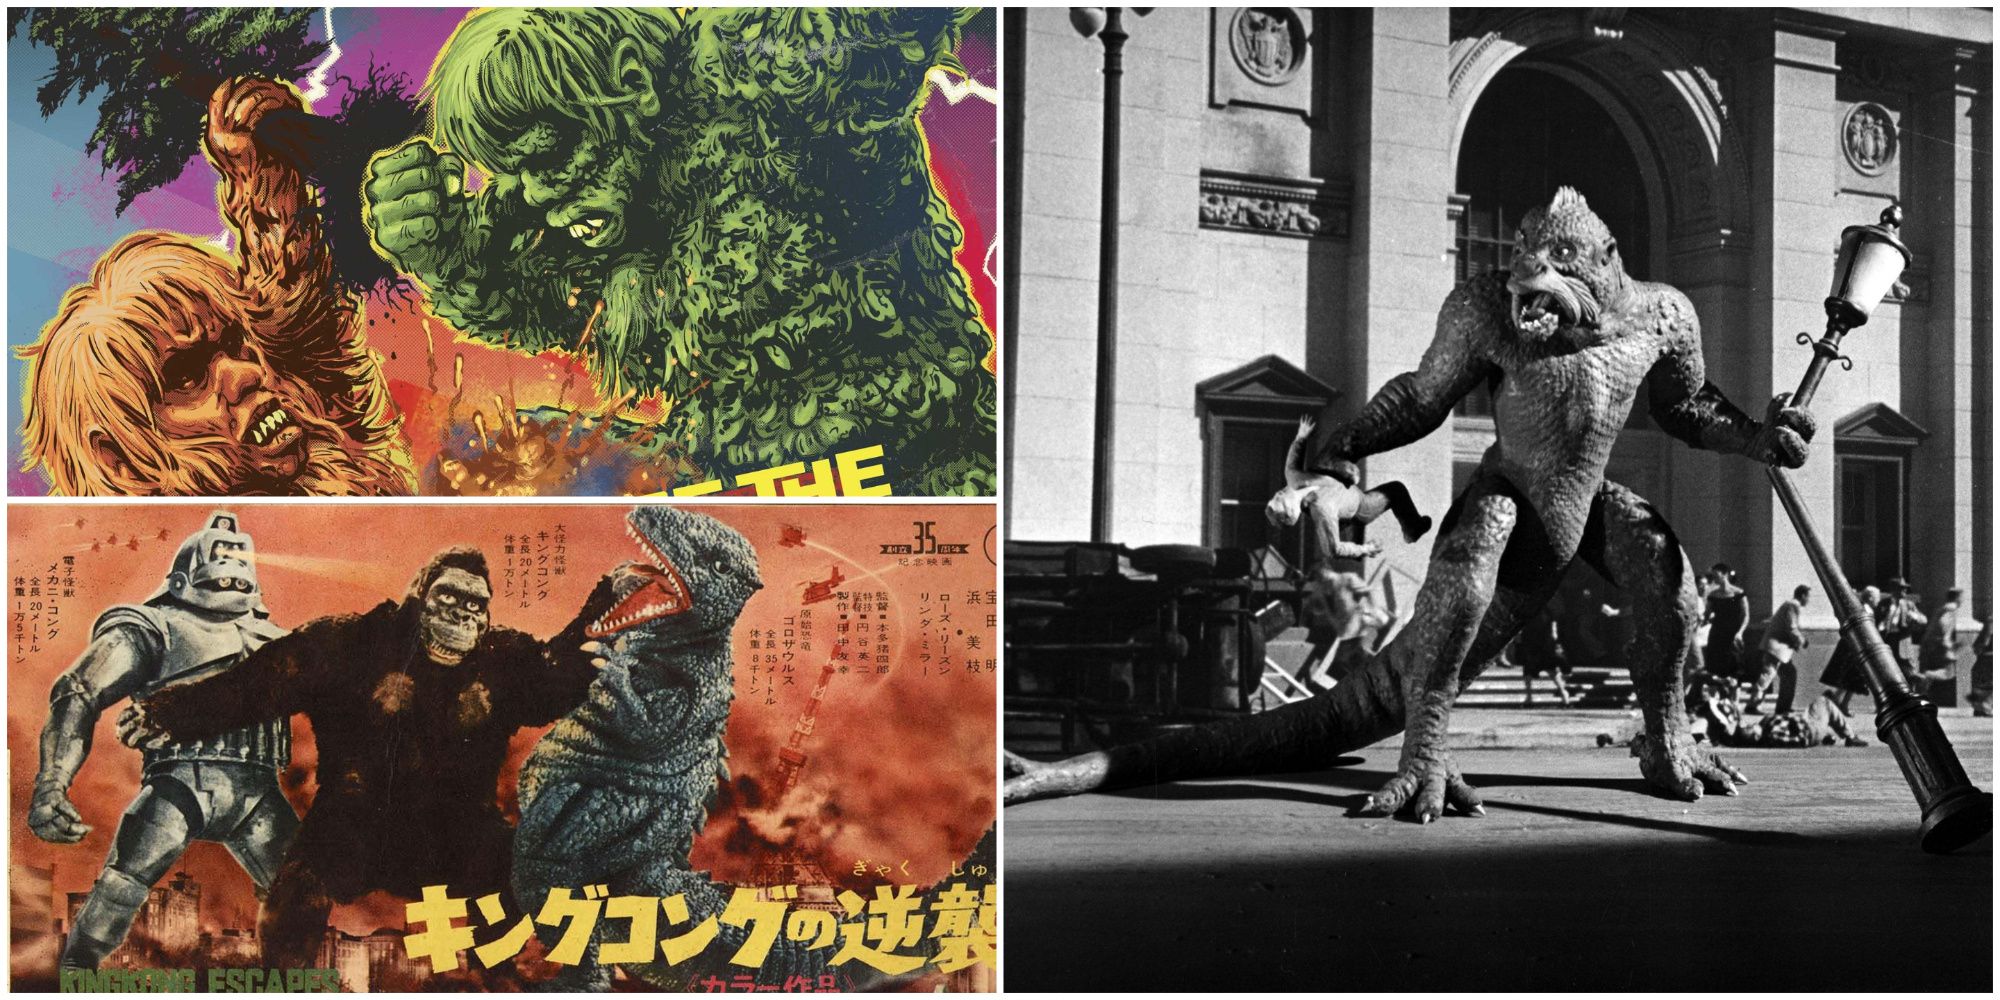 Underrated Kaiju Movies- War of the Gargantuas King Kong Escapes 20 Million Miles to Earth